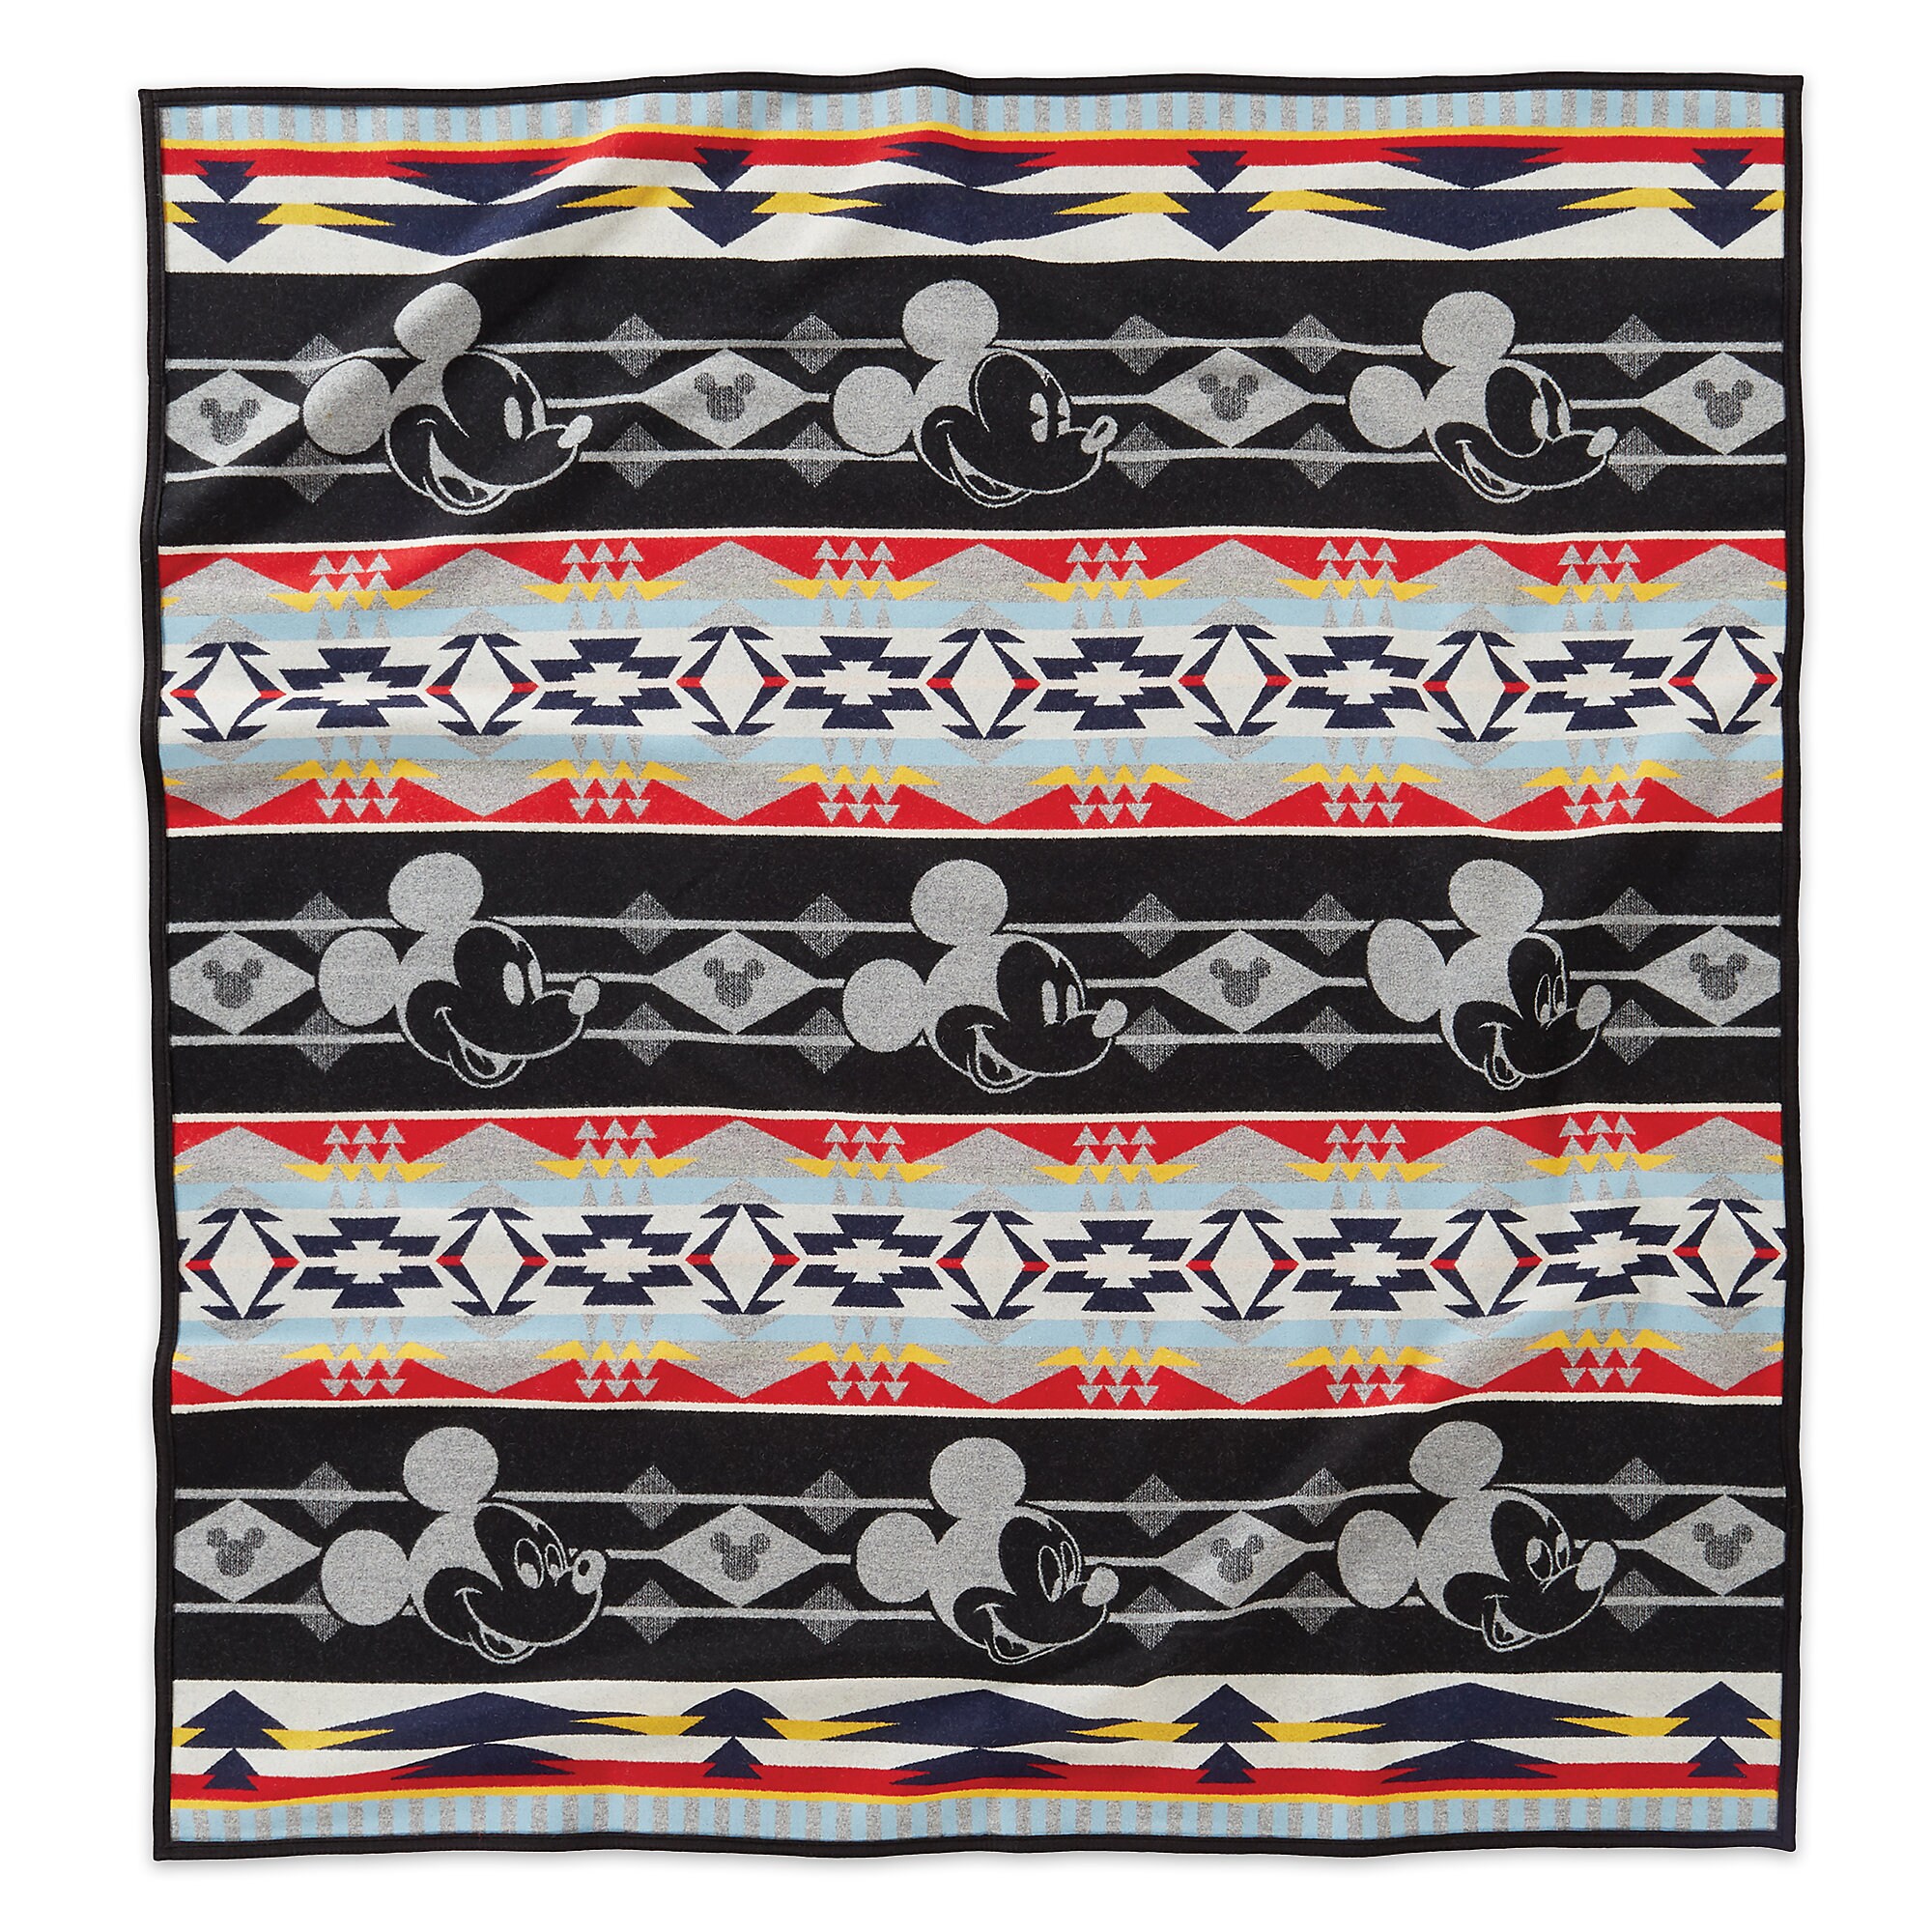 Mickey Mouse ''Mickey Through the Years'' Blanket by Pendleton - Limited Edition